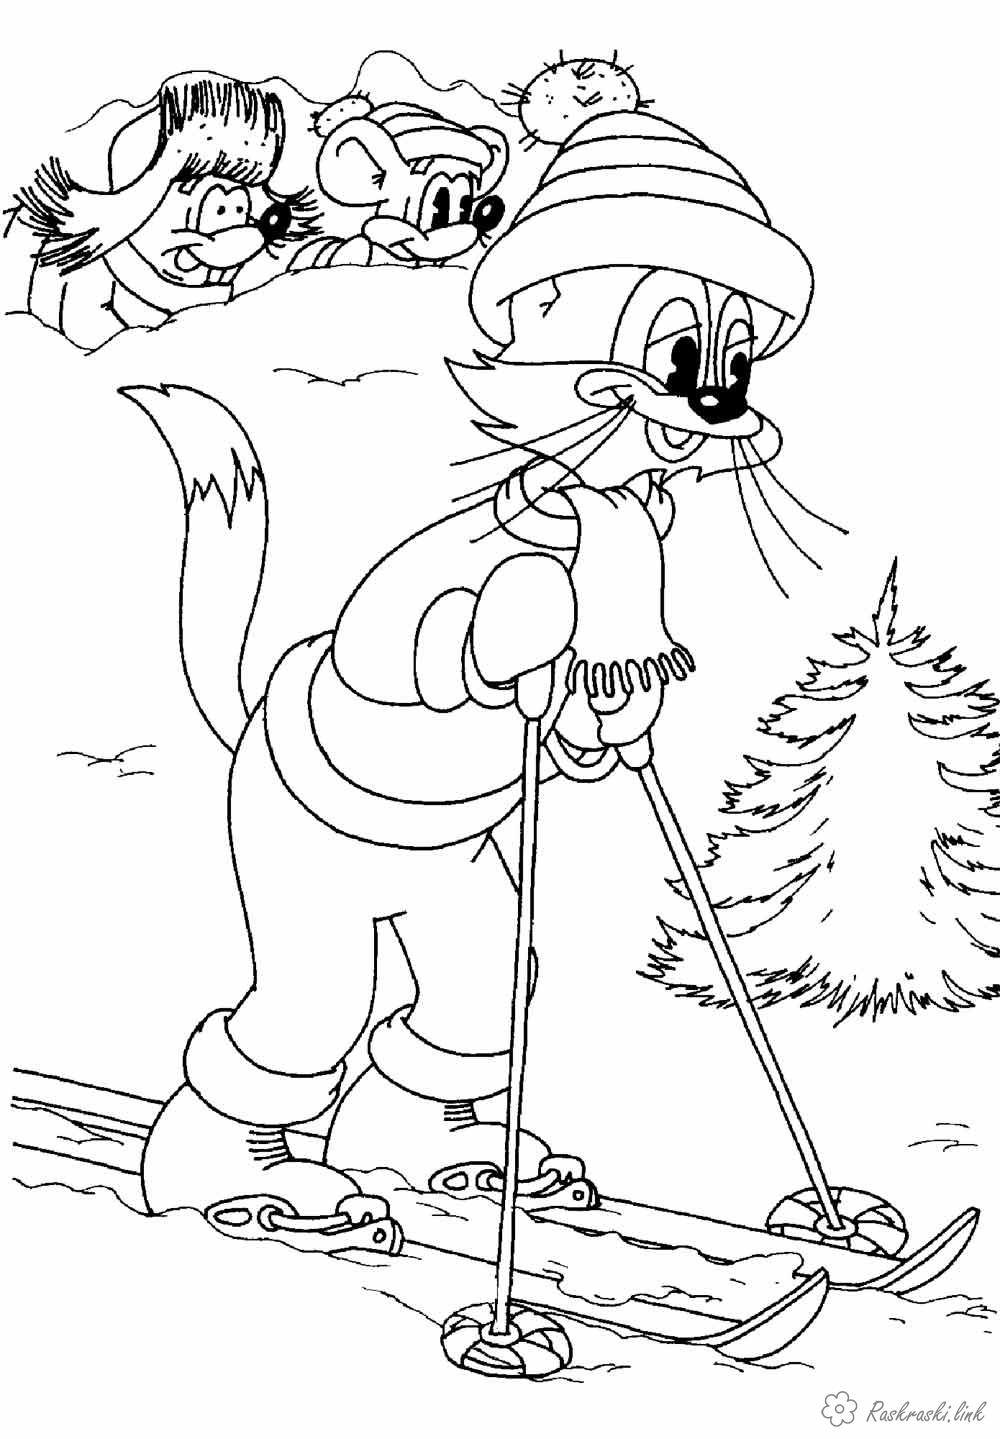 Soviet coloring pages Free Coloring pages online print.